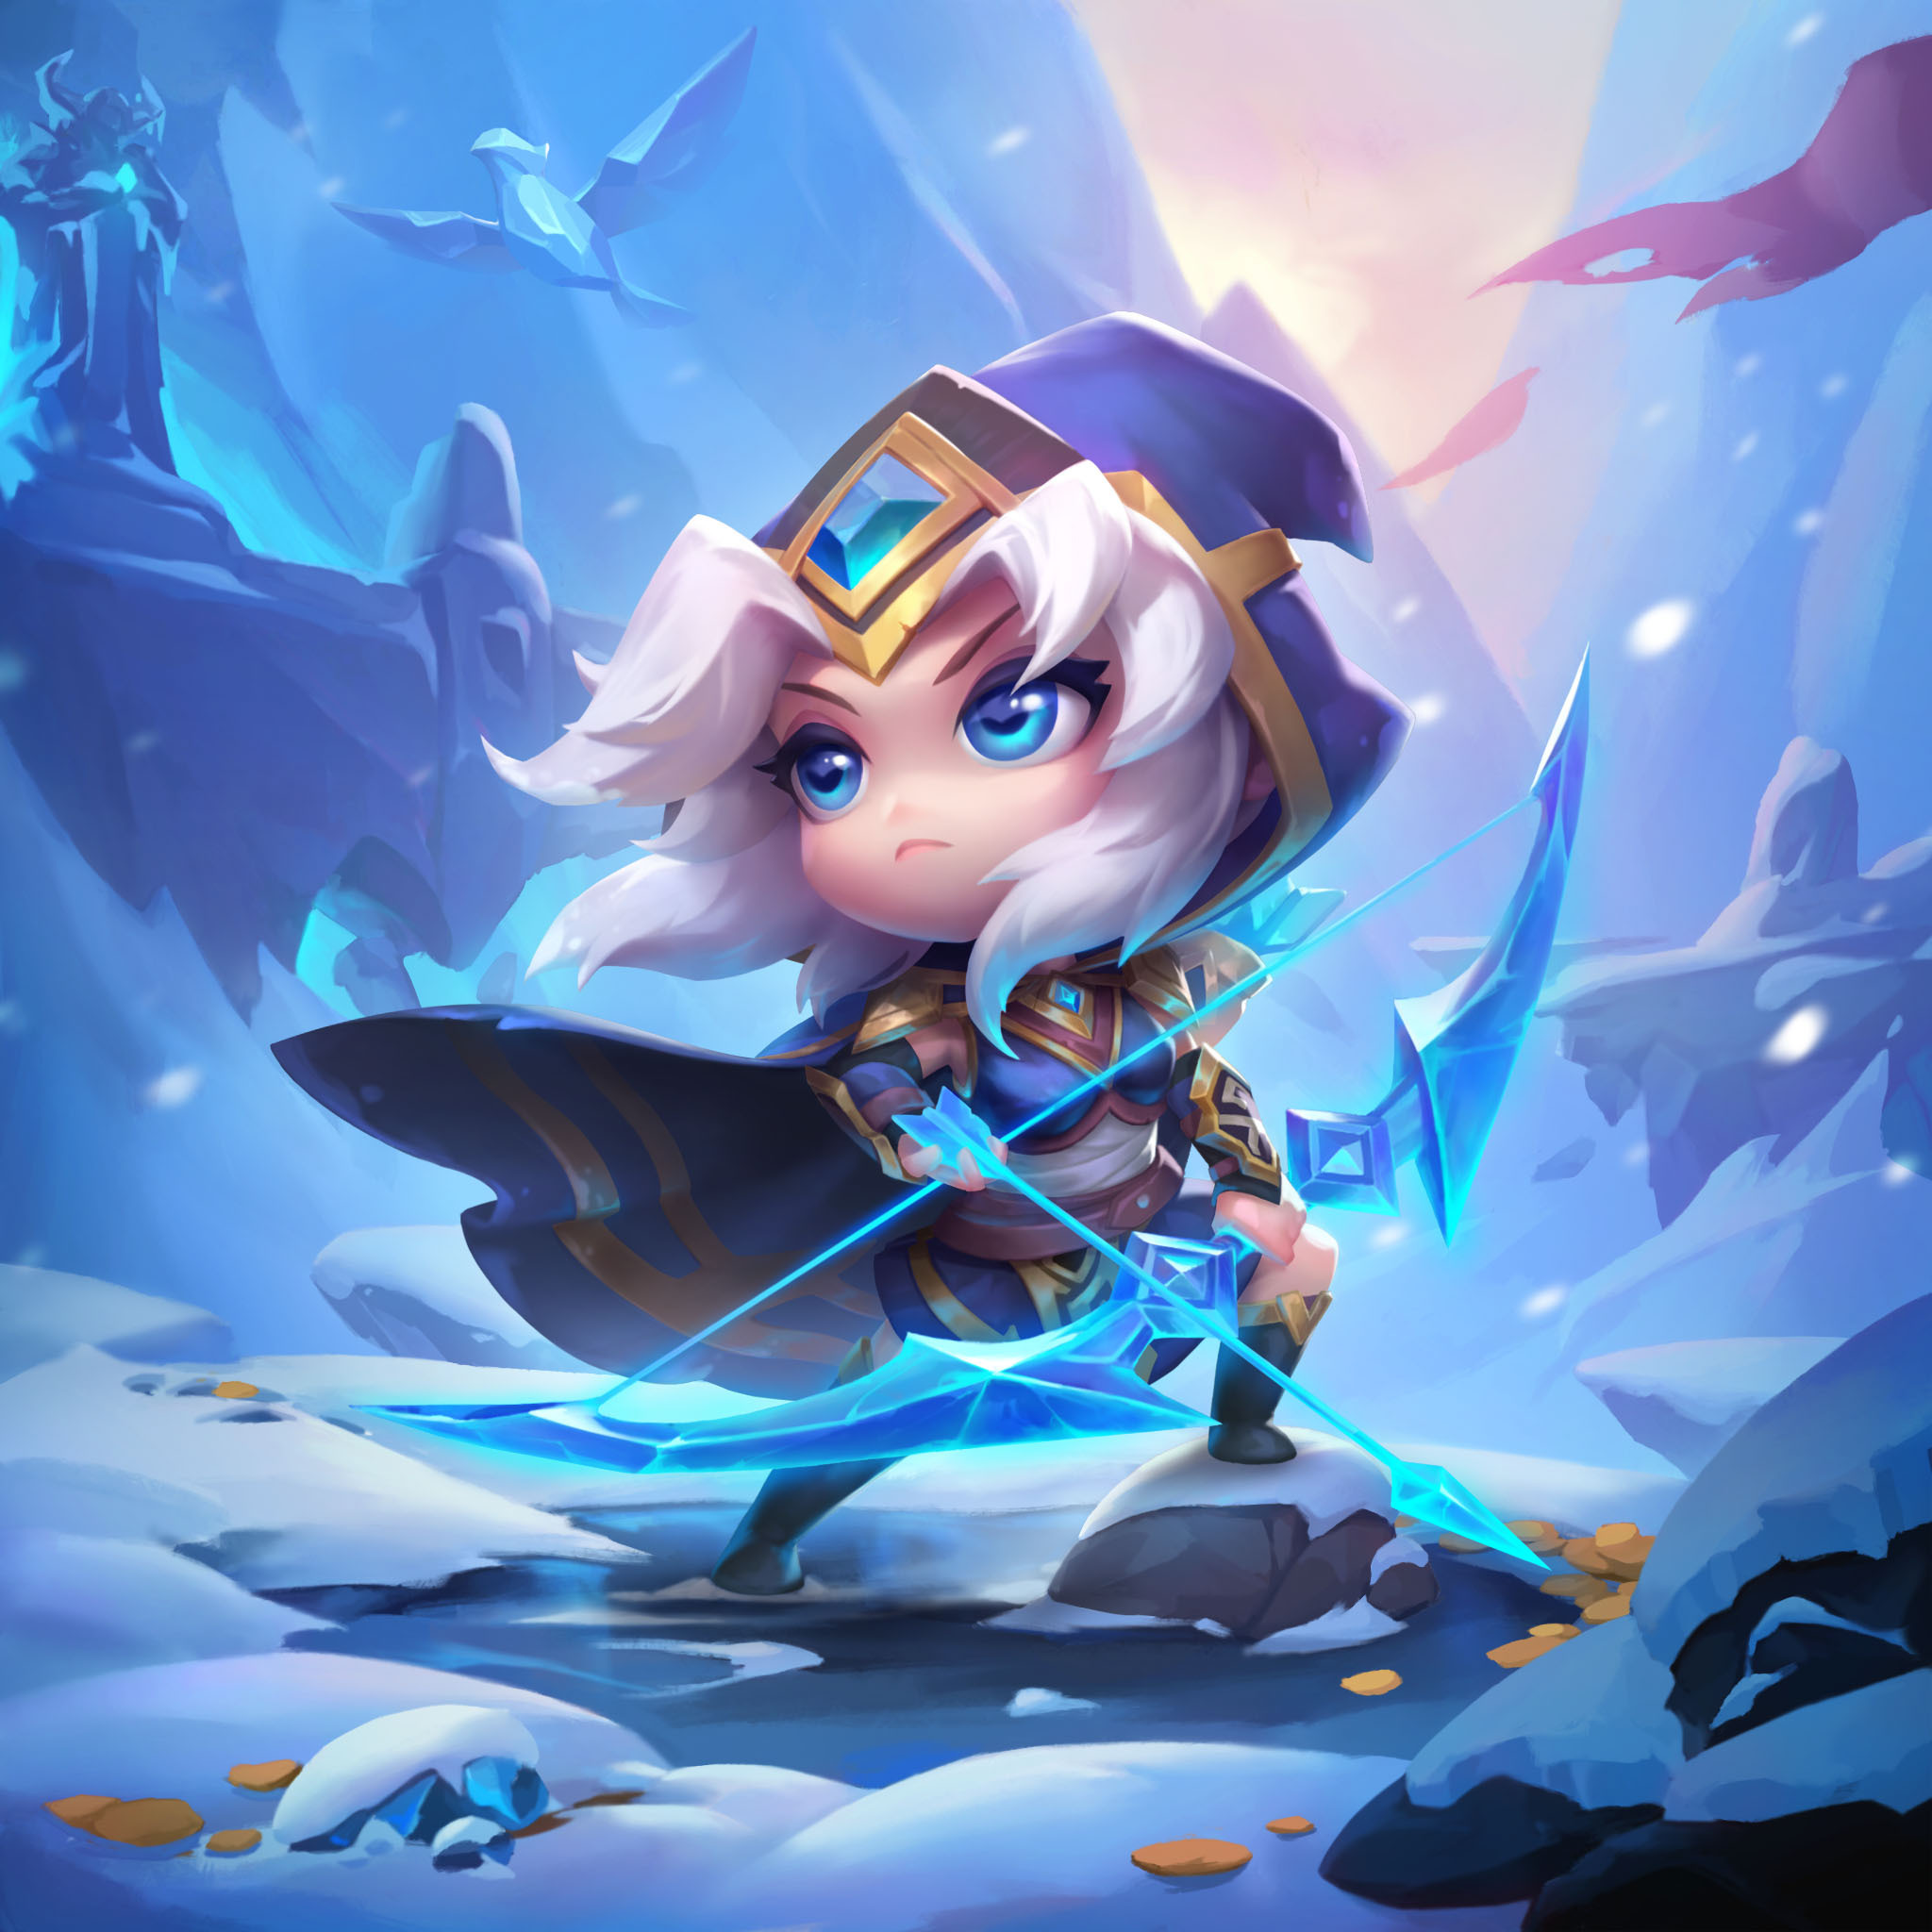 TFT 12.20 Patch notes